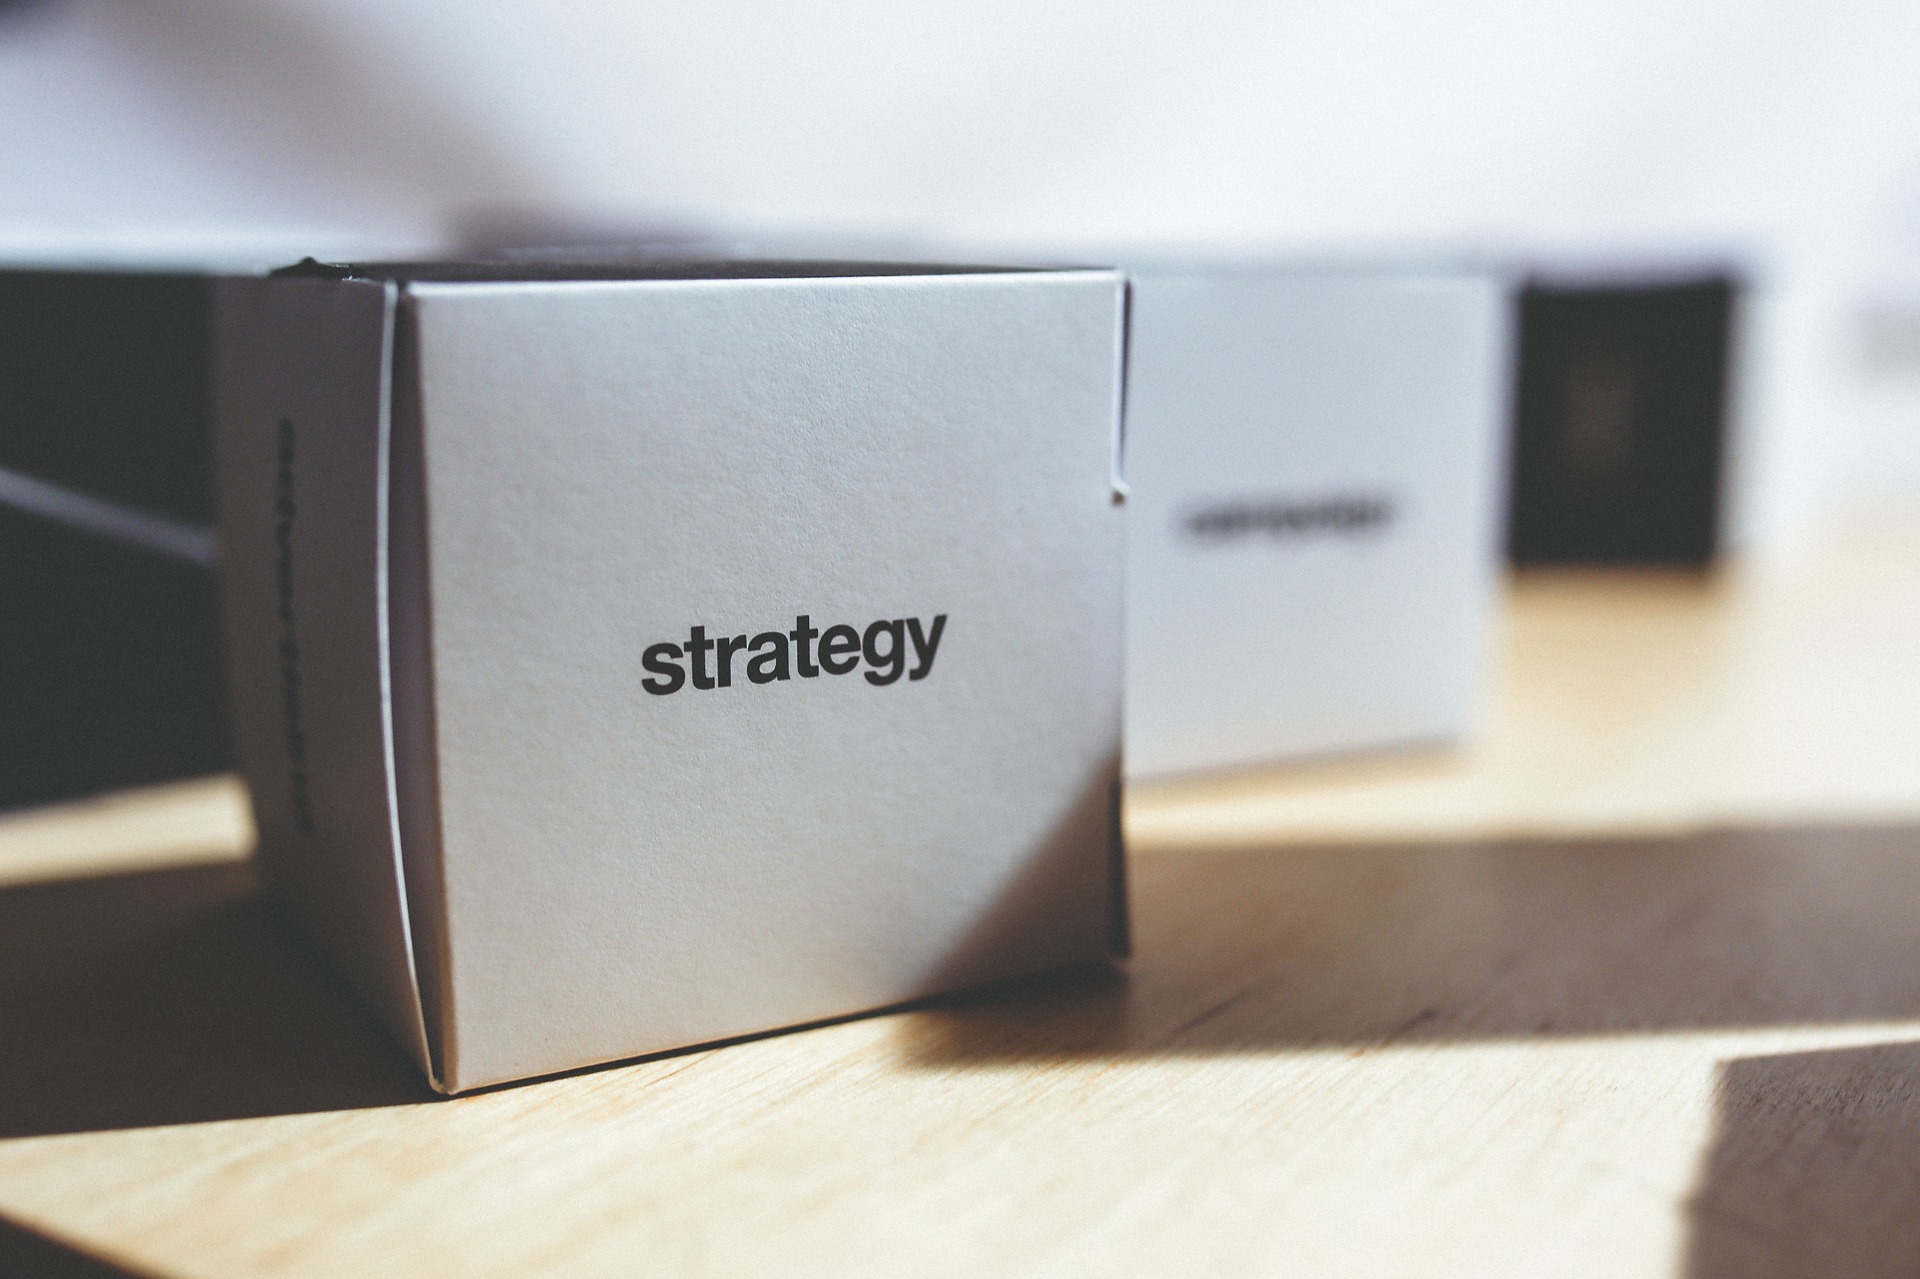 A cardboard cube with "strategy" written on it